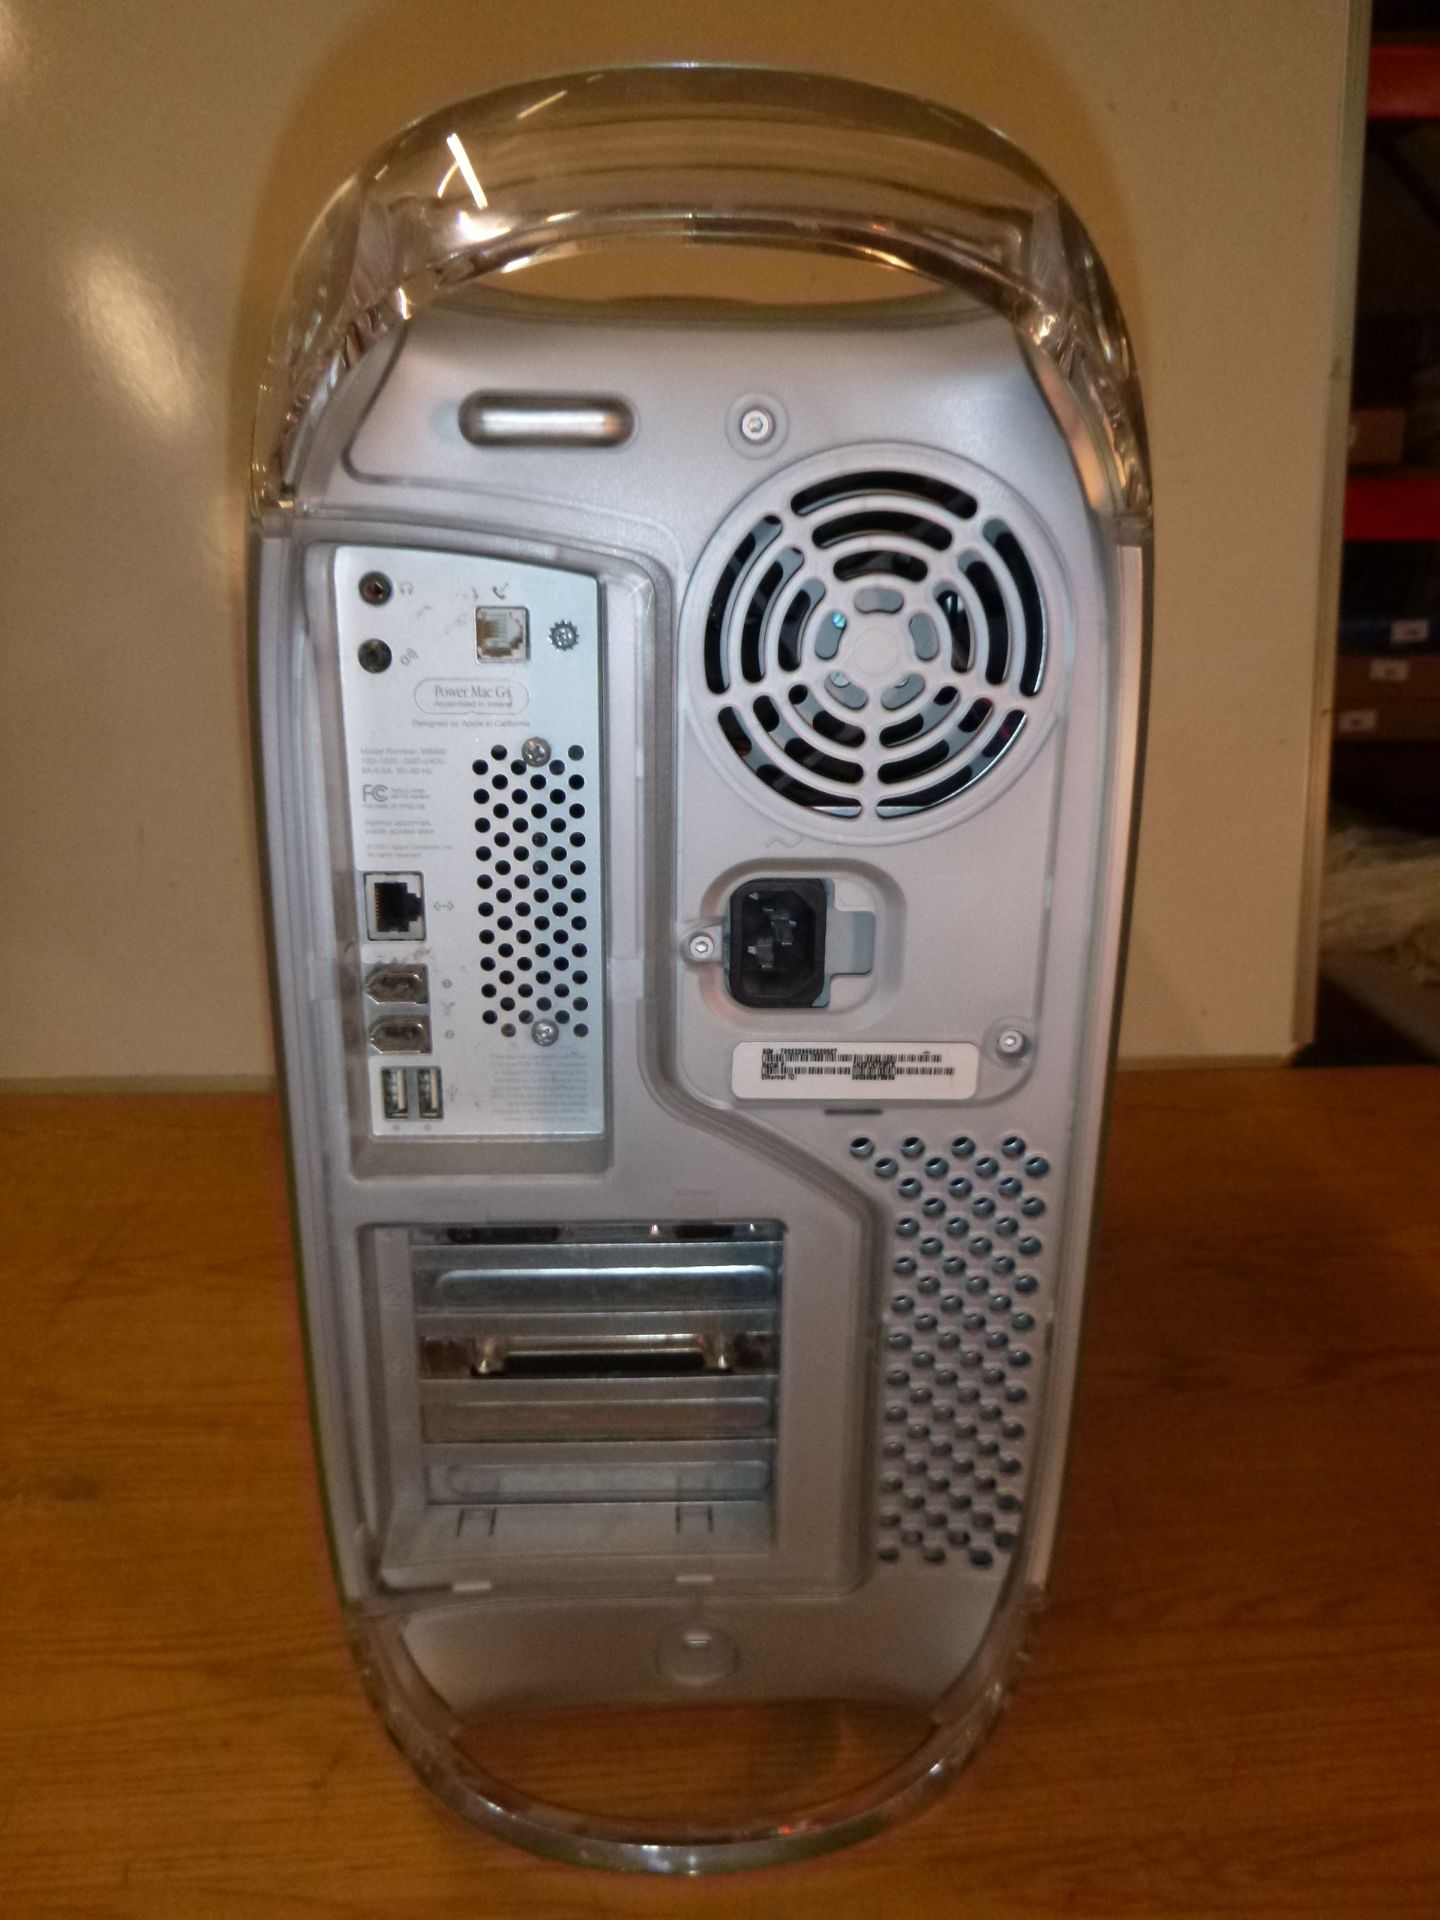 APPLE POWERMAC G4 TOWER SYSTEM. MODEL M8493 2 X PPC-G4 1GHZ PROCESSORS. 512MB RAM, 80GB HDD. - Image 2 of 2